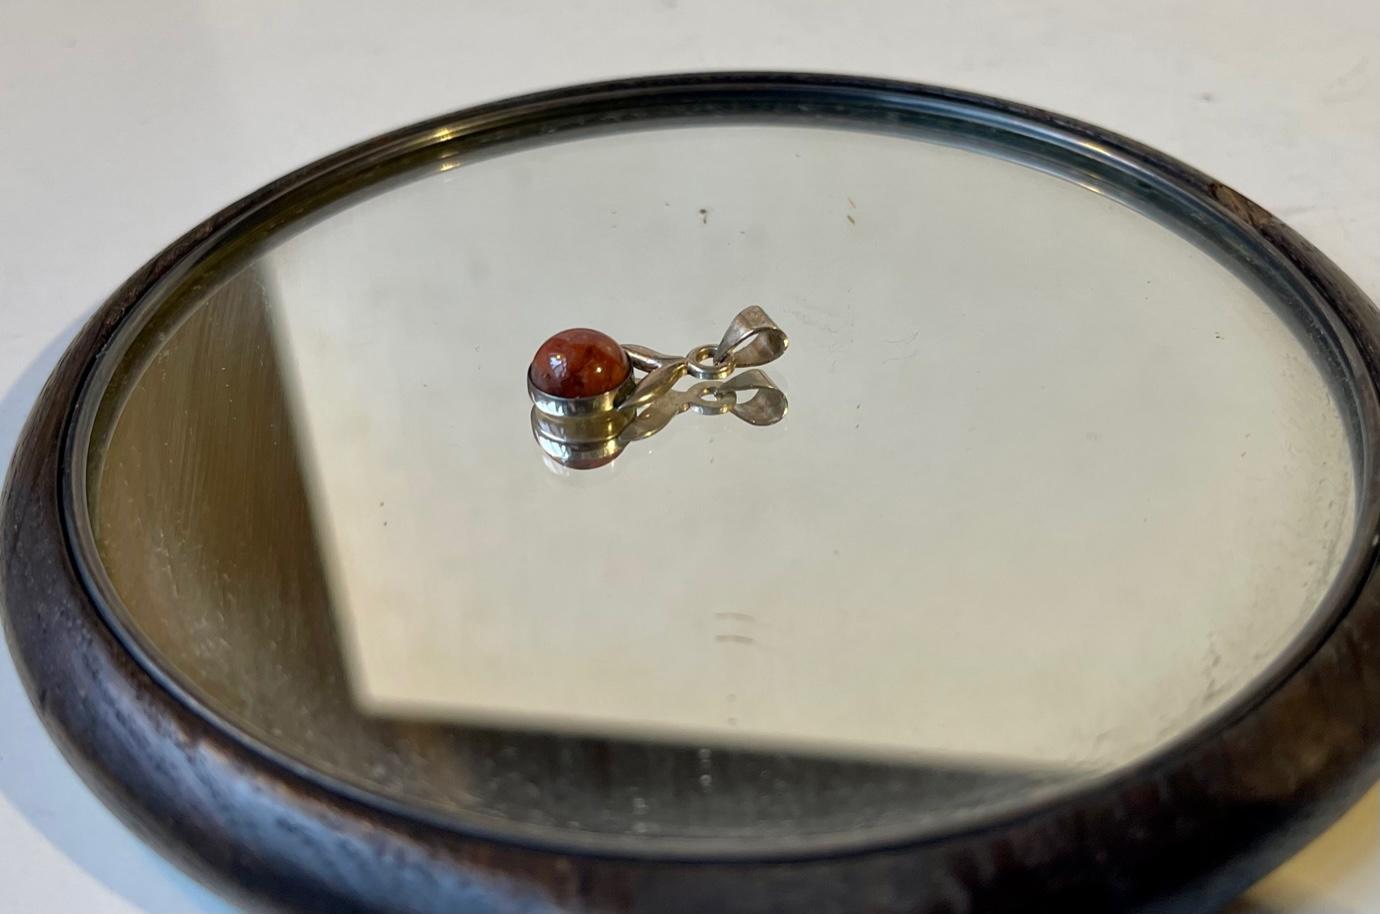 Small rare and early 1970s pendant by the Danish silversmith N. E. From. This florally inspired pendant has a polished insert of Danish 'red' amber. Hallmark: From, 925s. Measurements: H: 22 mm, Diameter: 0.6 mm.


